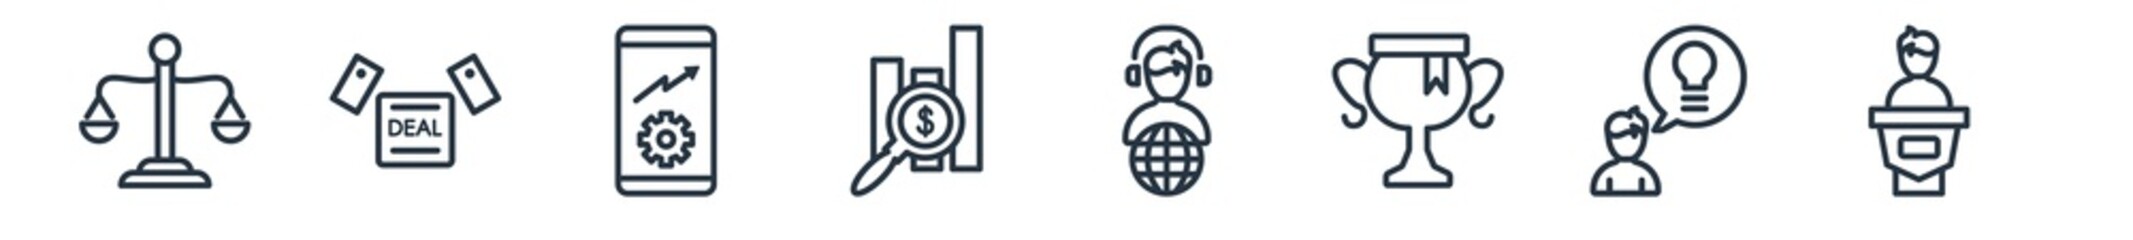 linear set of strategy outline icons. line vector icons such as balance?, deal?, smartphone?, forecast, customer support?, speech? vector illustration.